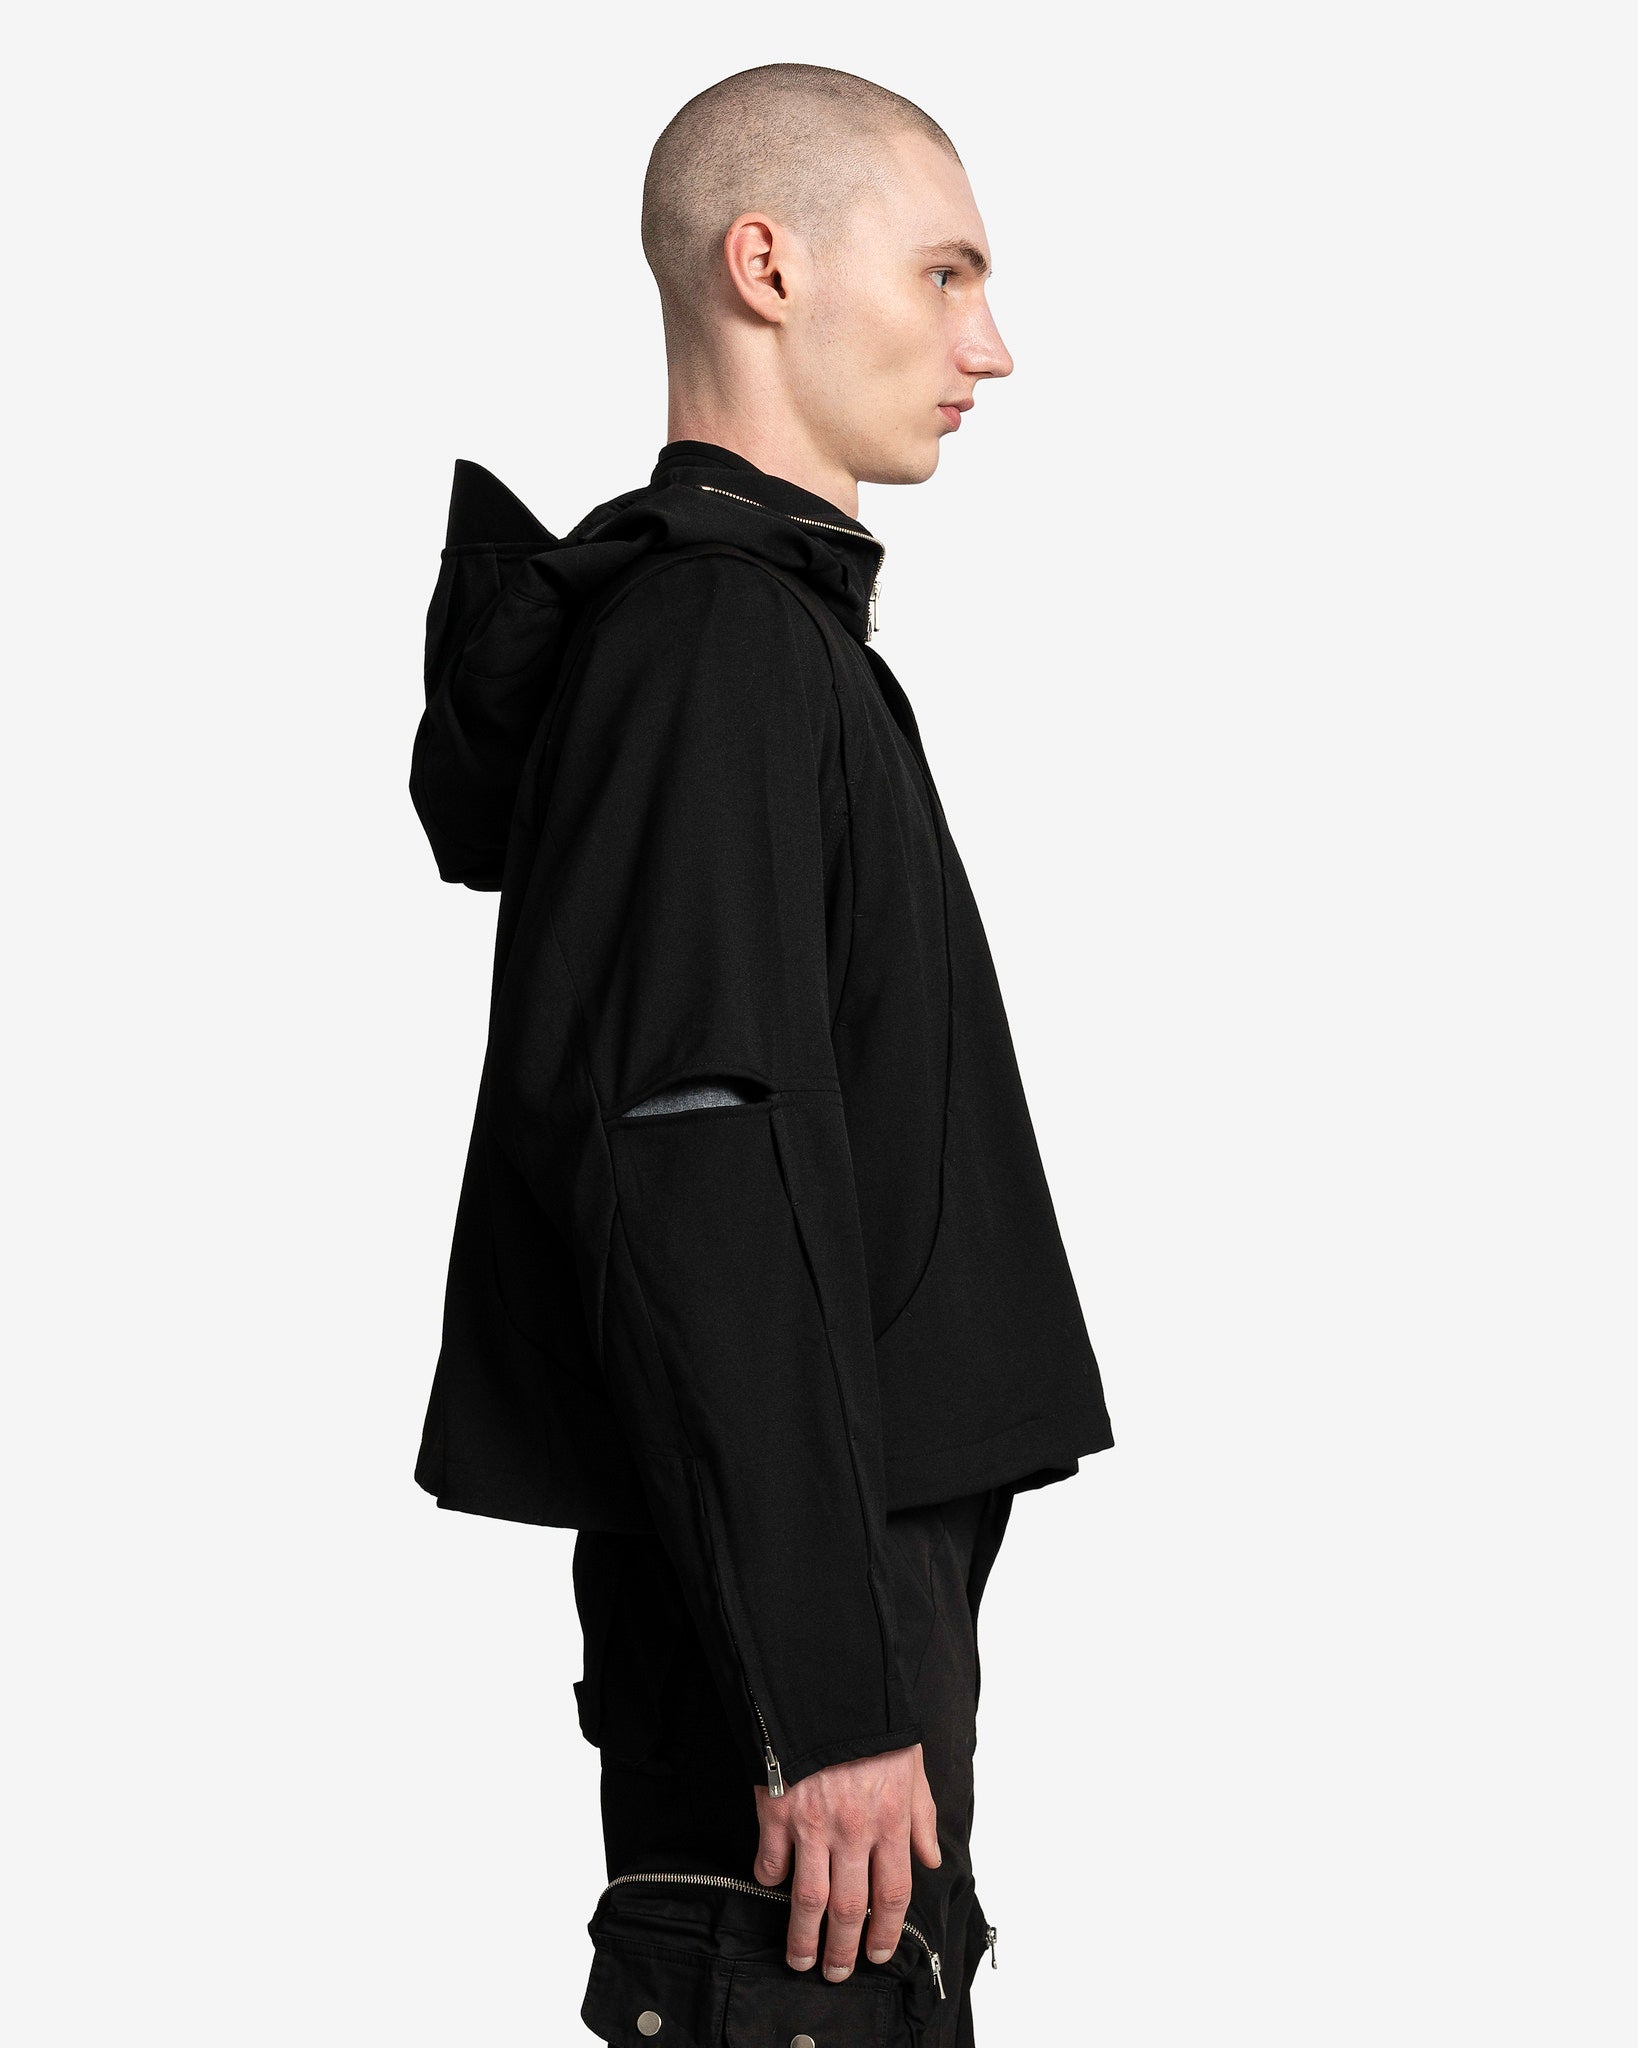 Hooded Parachute Bomber with Detachable Hood in Black